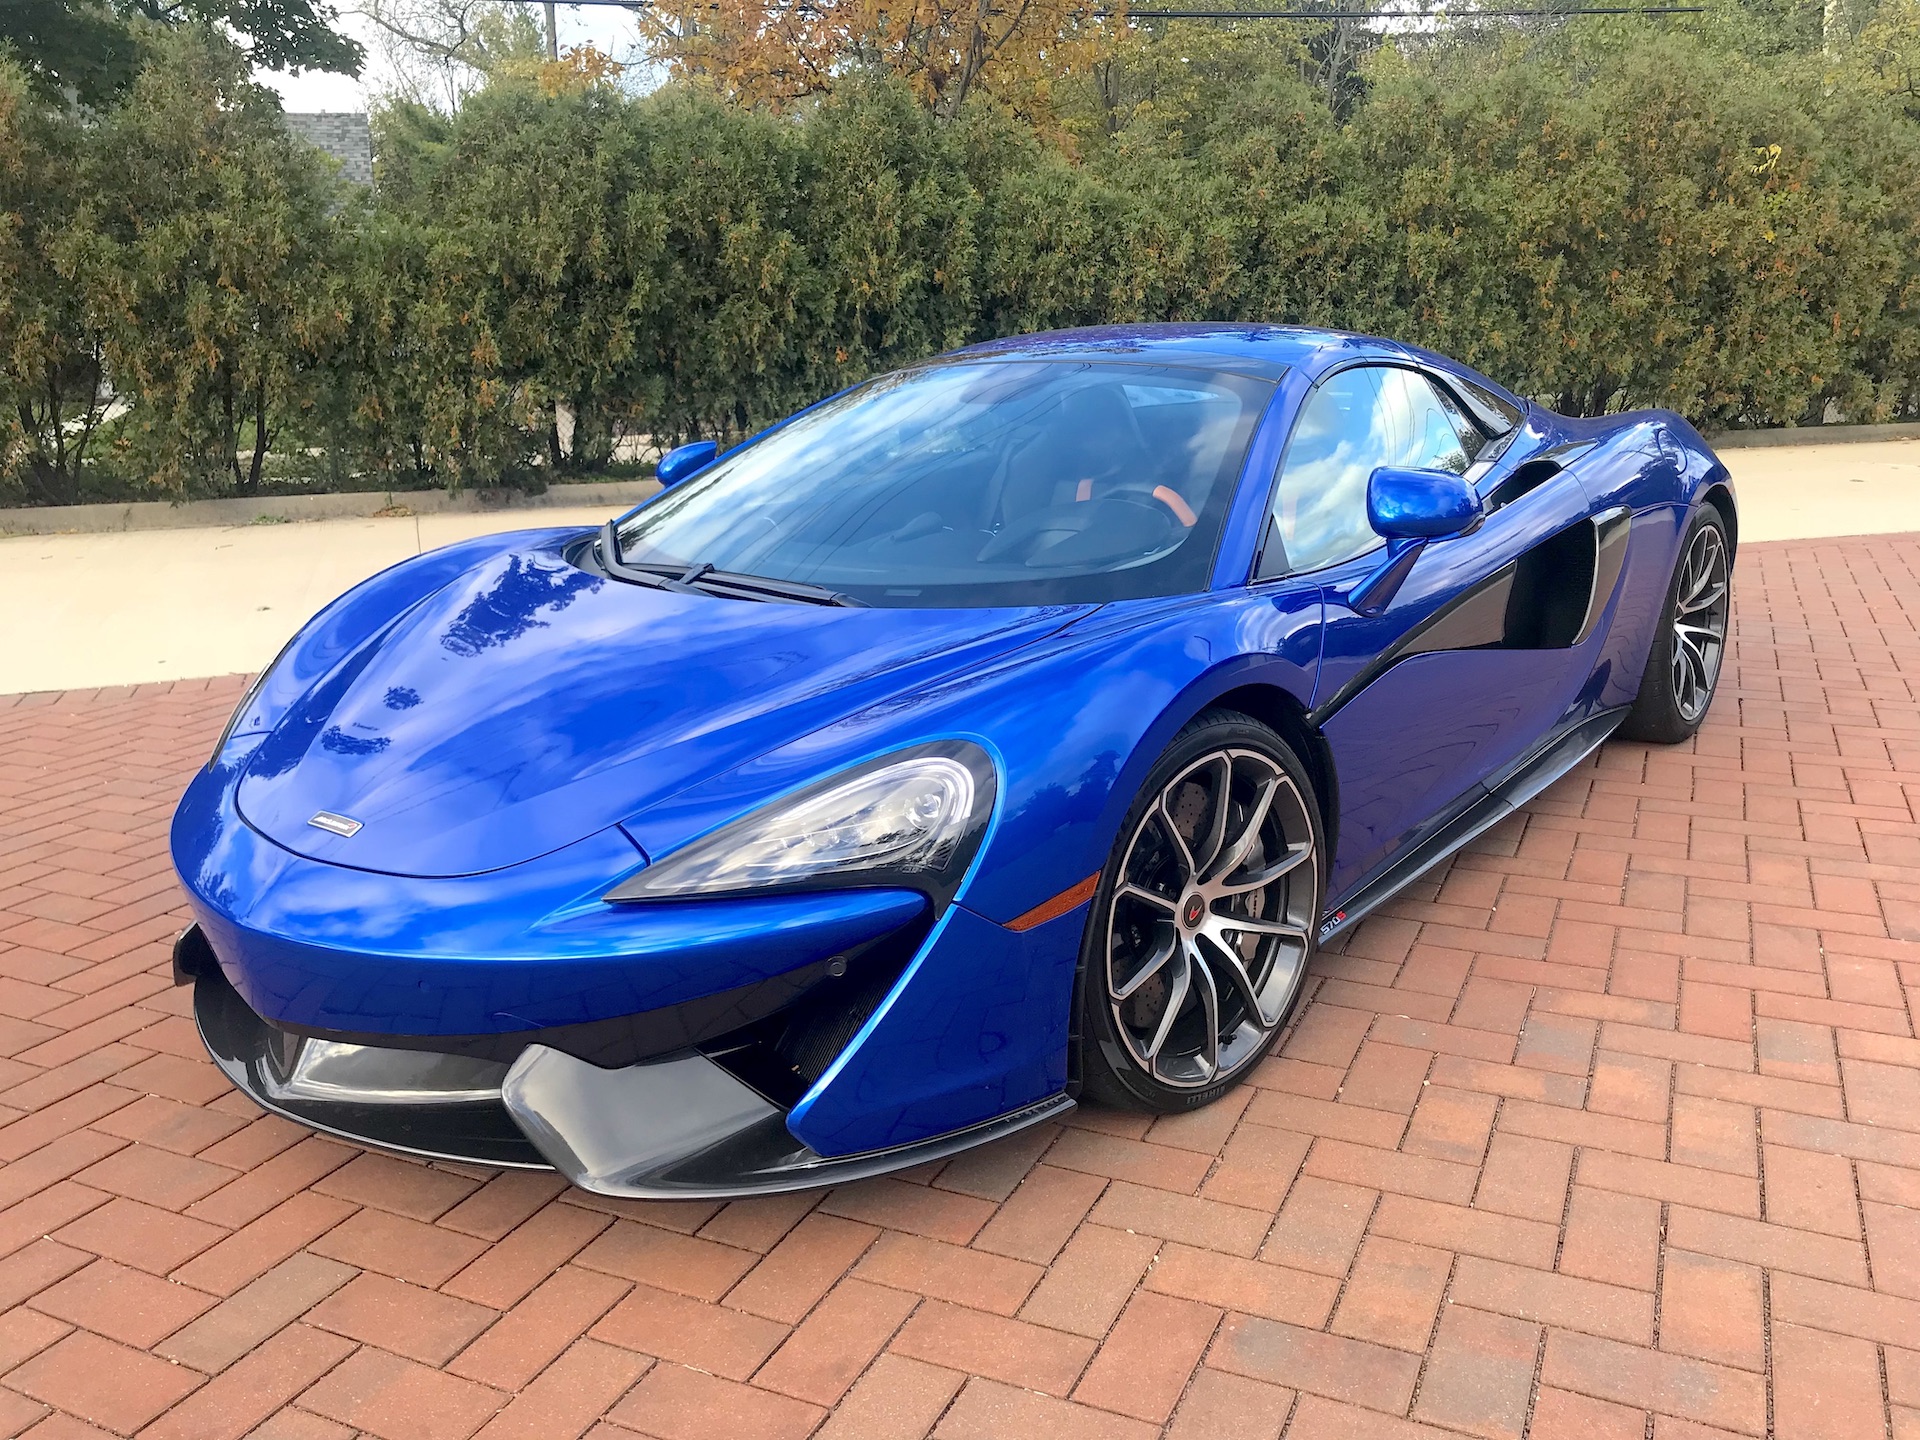 2018 Mclaren 570s Spider First Drive Review Baseline Dream Machine Images, Photos, Reviews